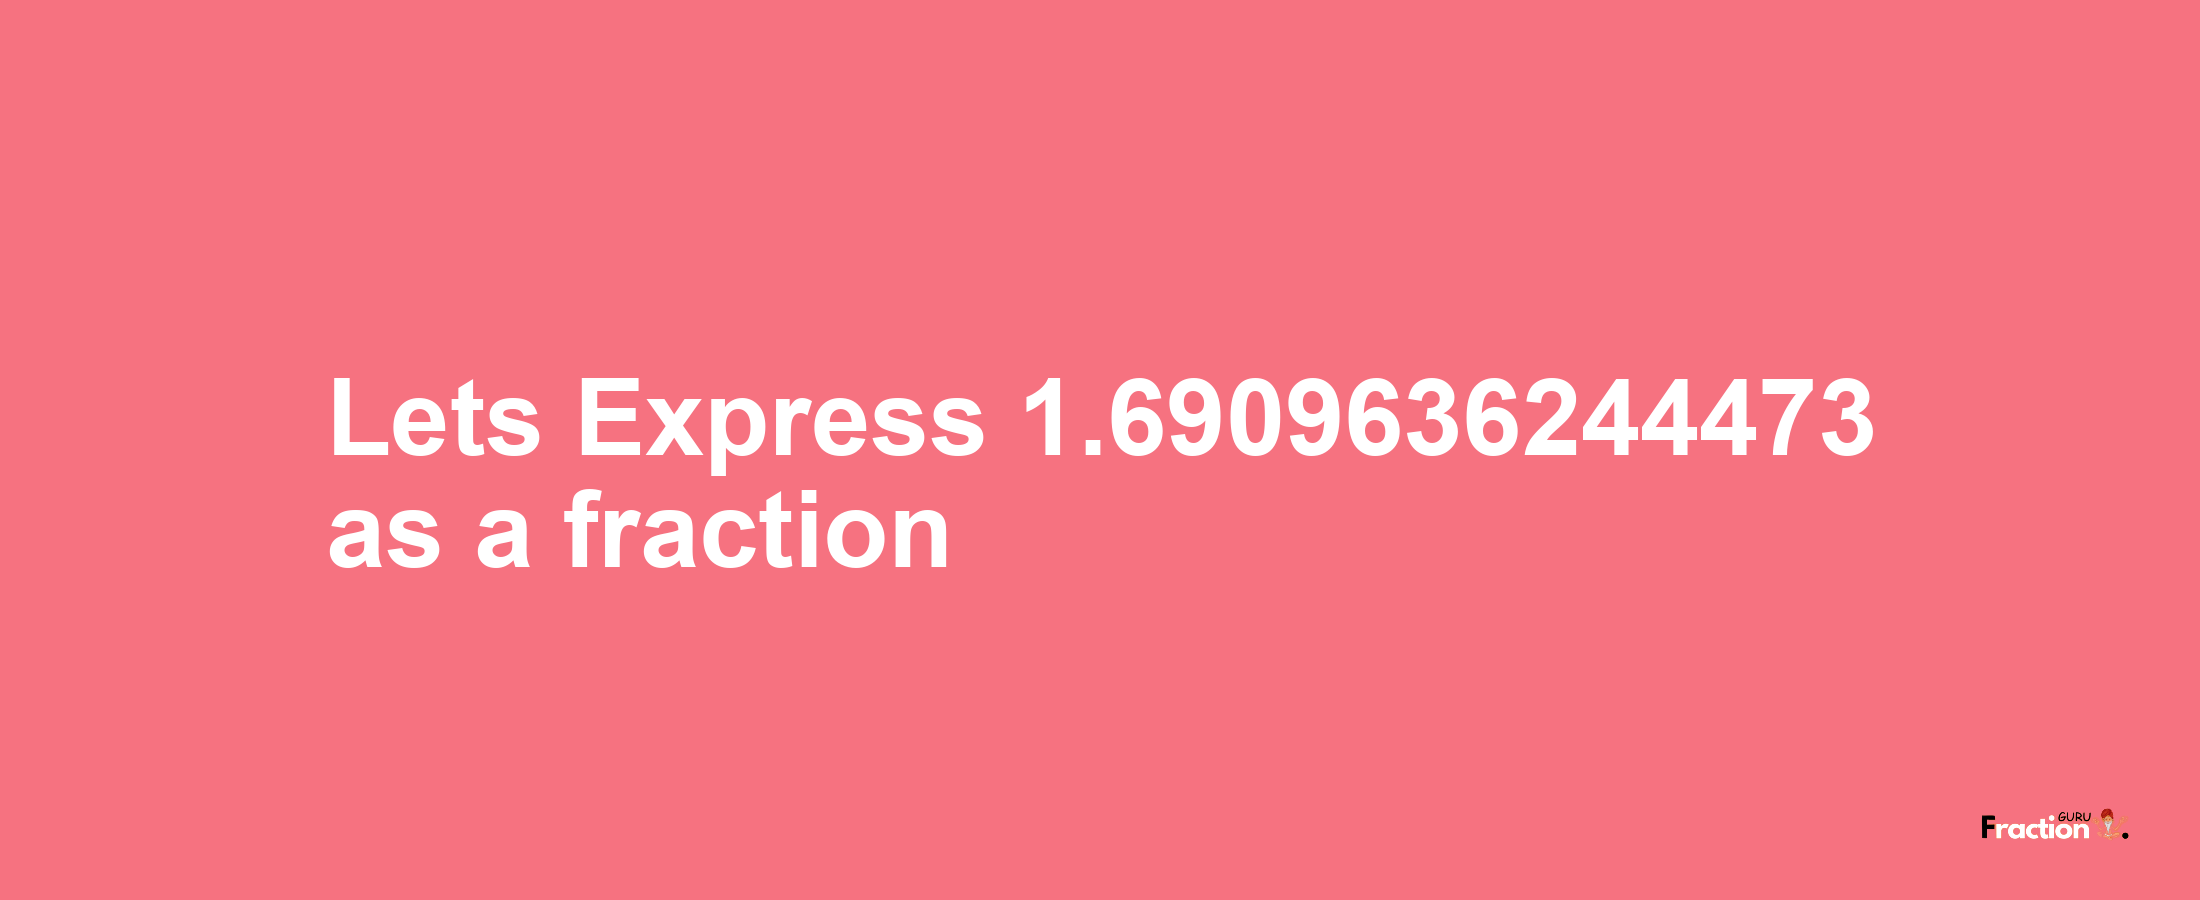 Lets Express 1.6909636244473 as afraction